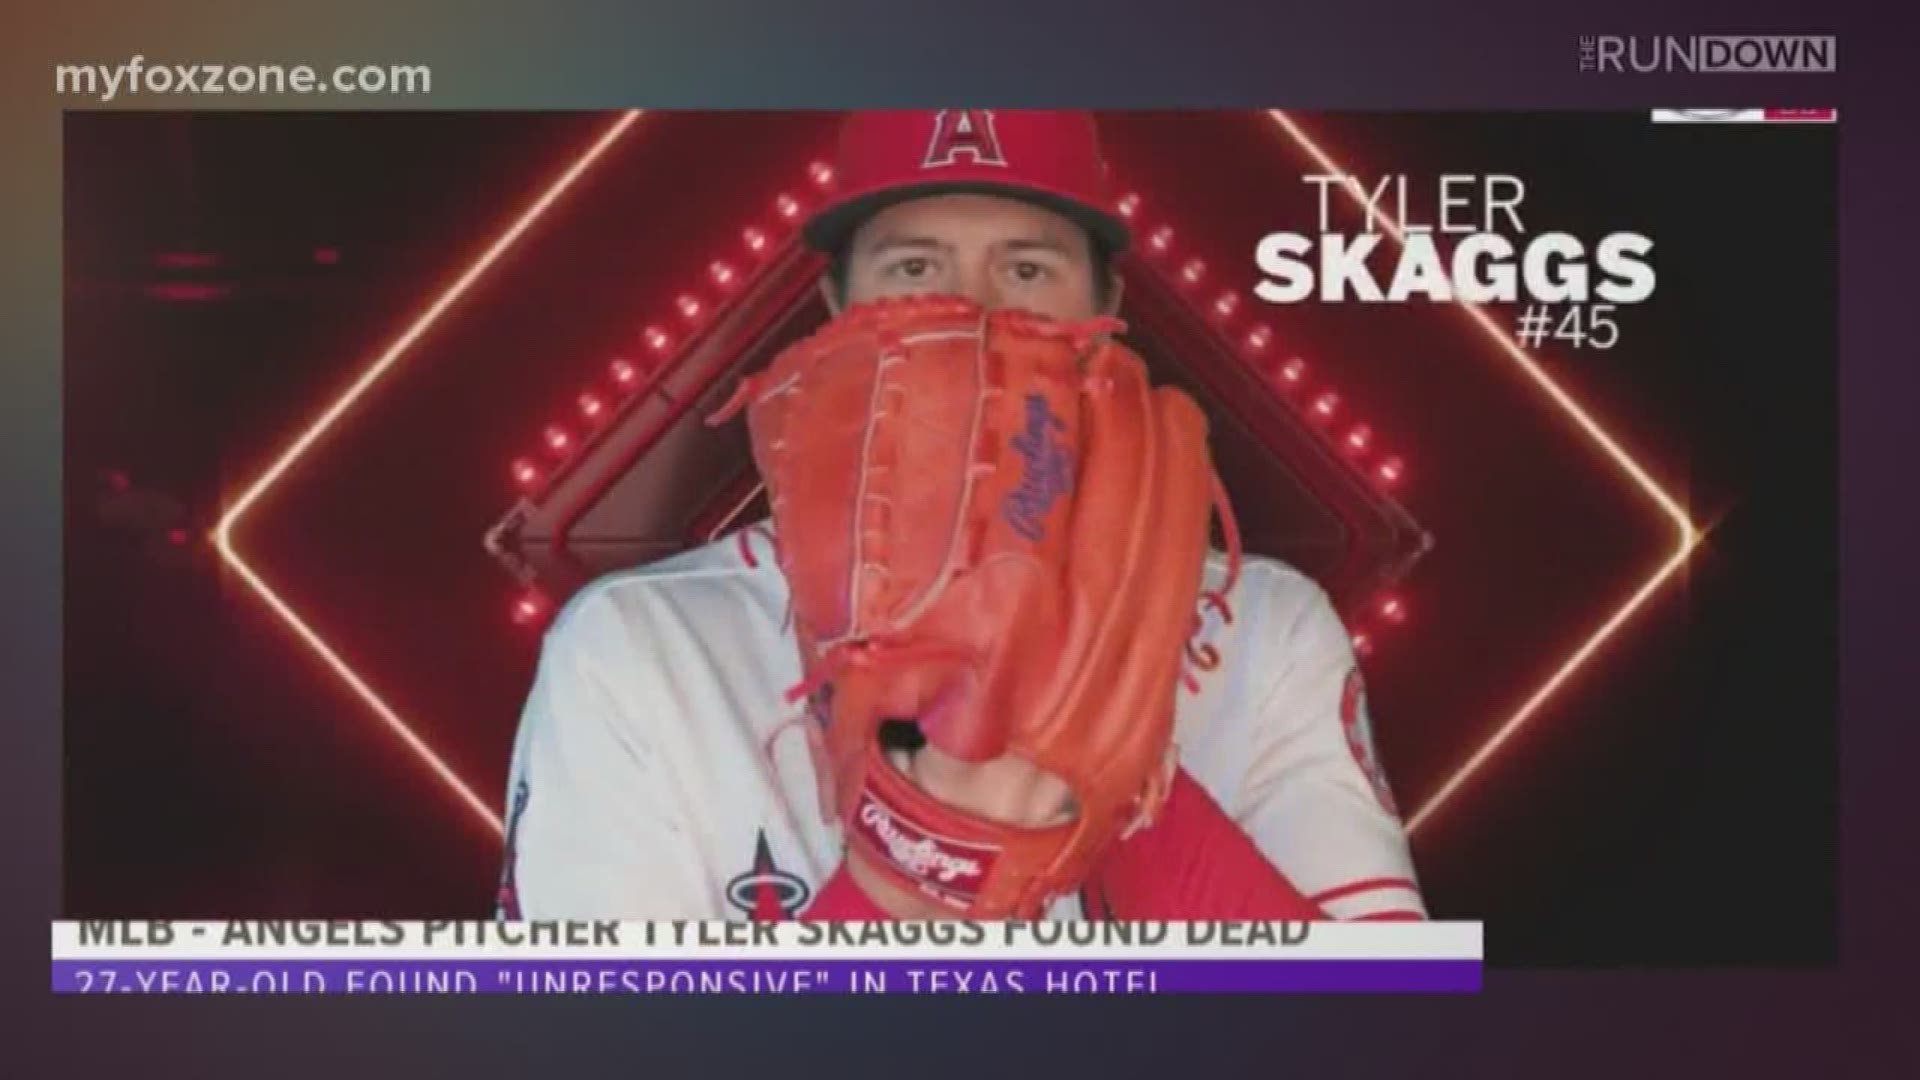 Los Angeles Angels pitcher Tyler Skaggs found unresponsive in Southlake hotel